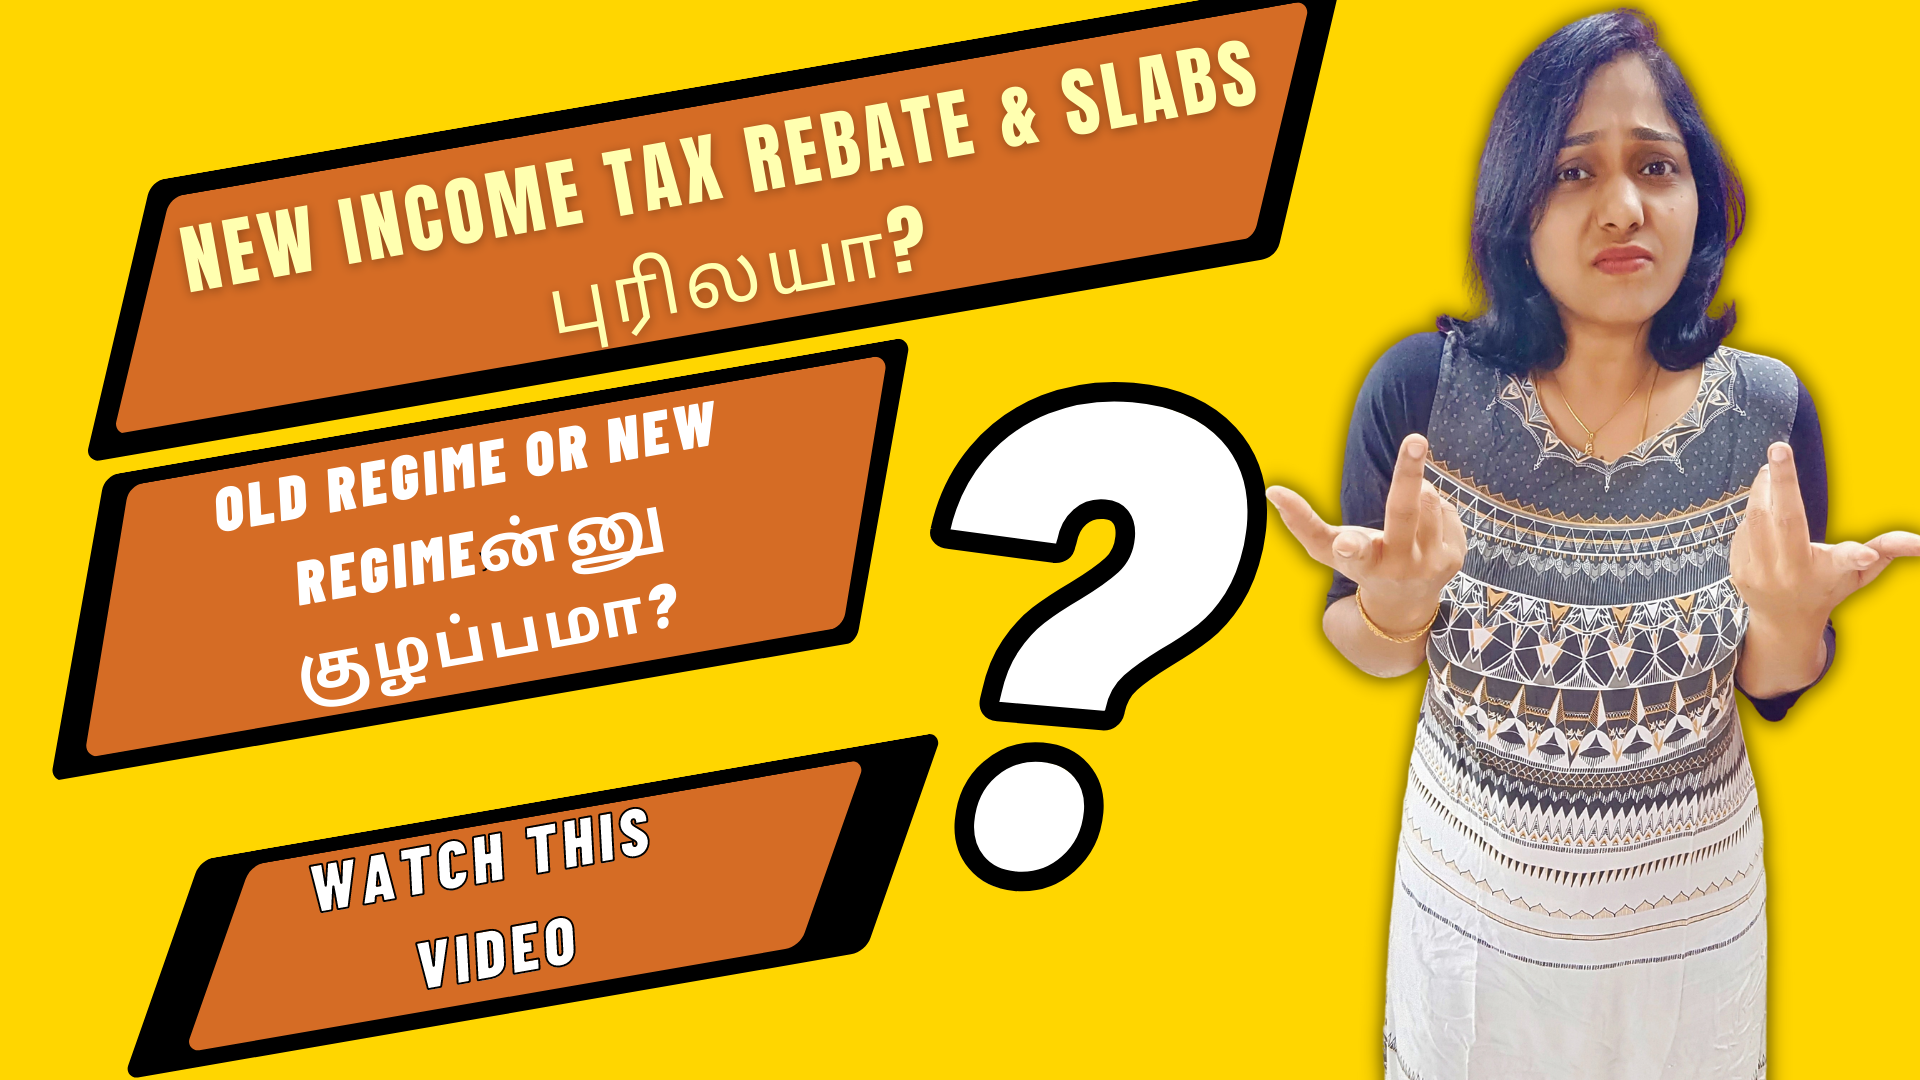 Income Tax New Regime Rebate And Slabs Explained